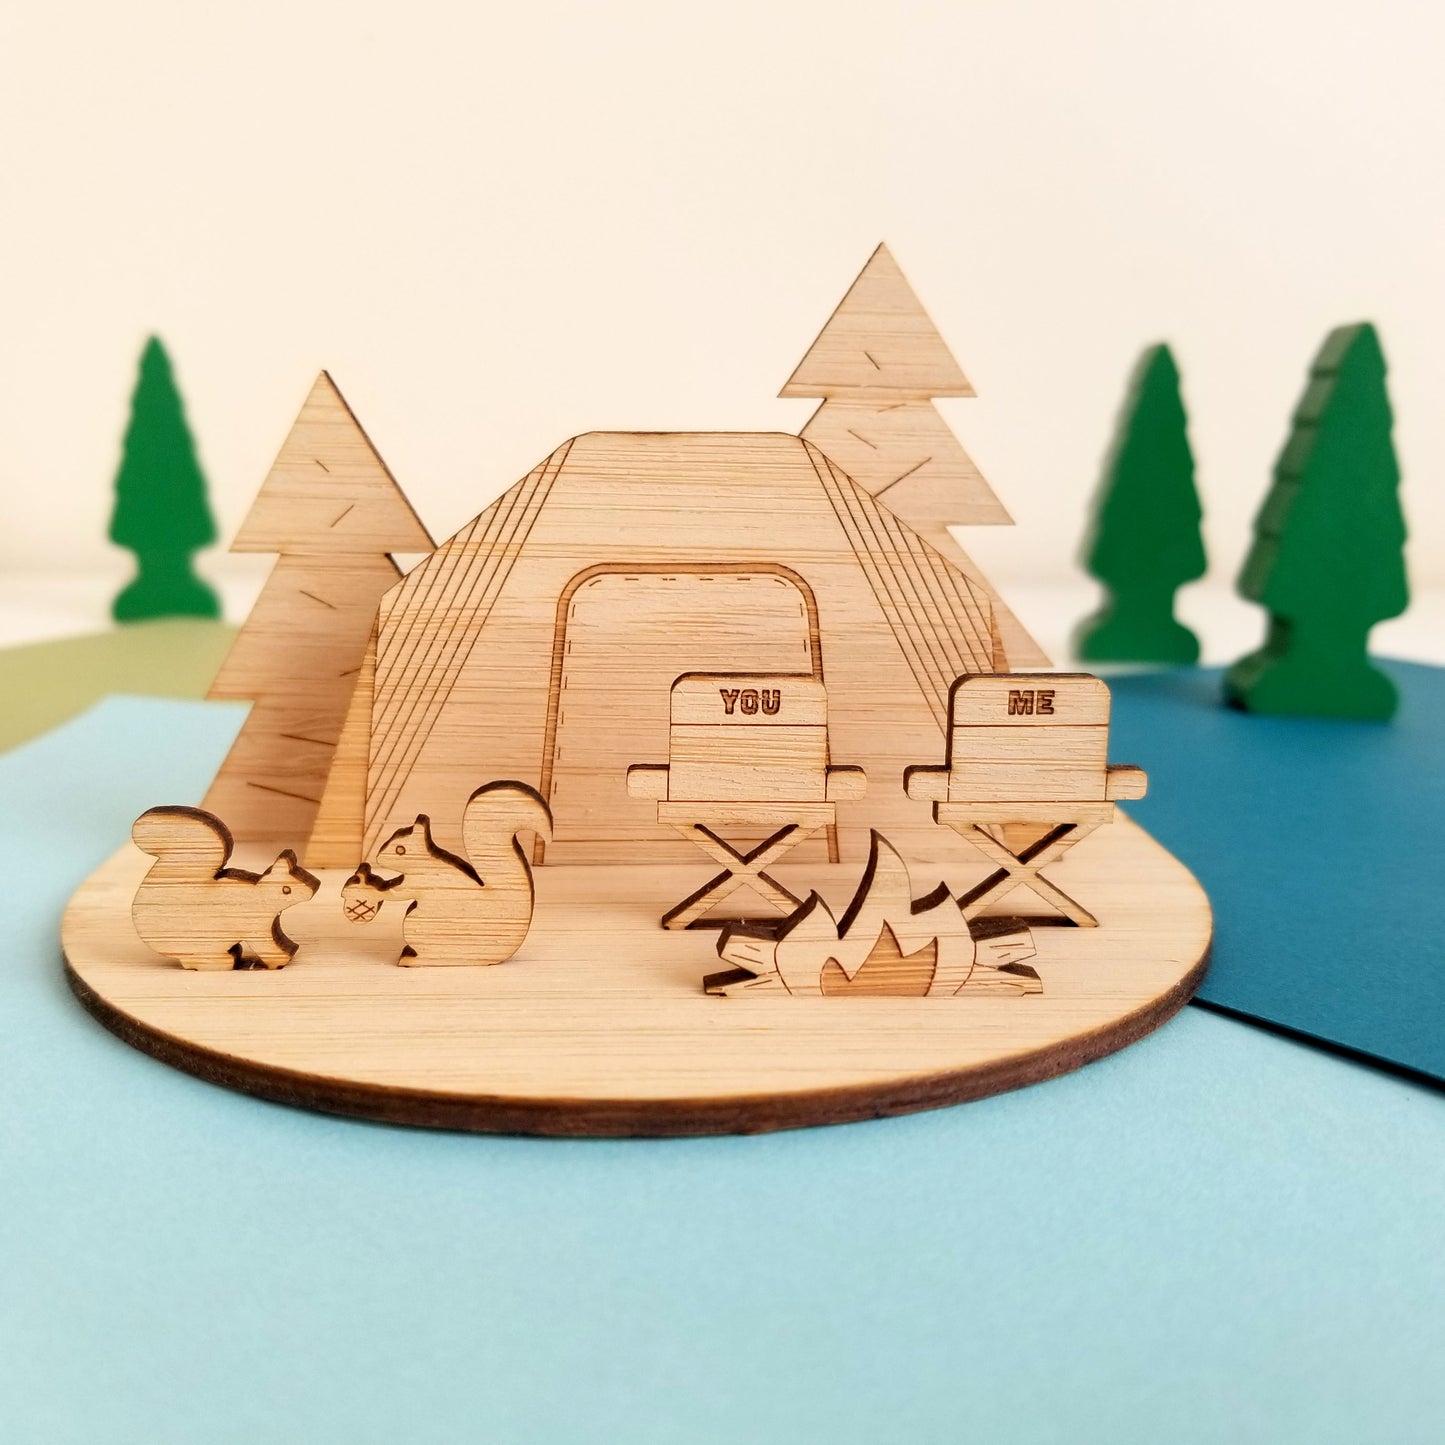 Our Love Is In-Tents Wood CardScape